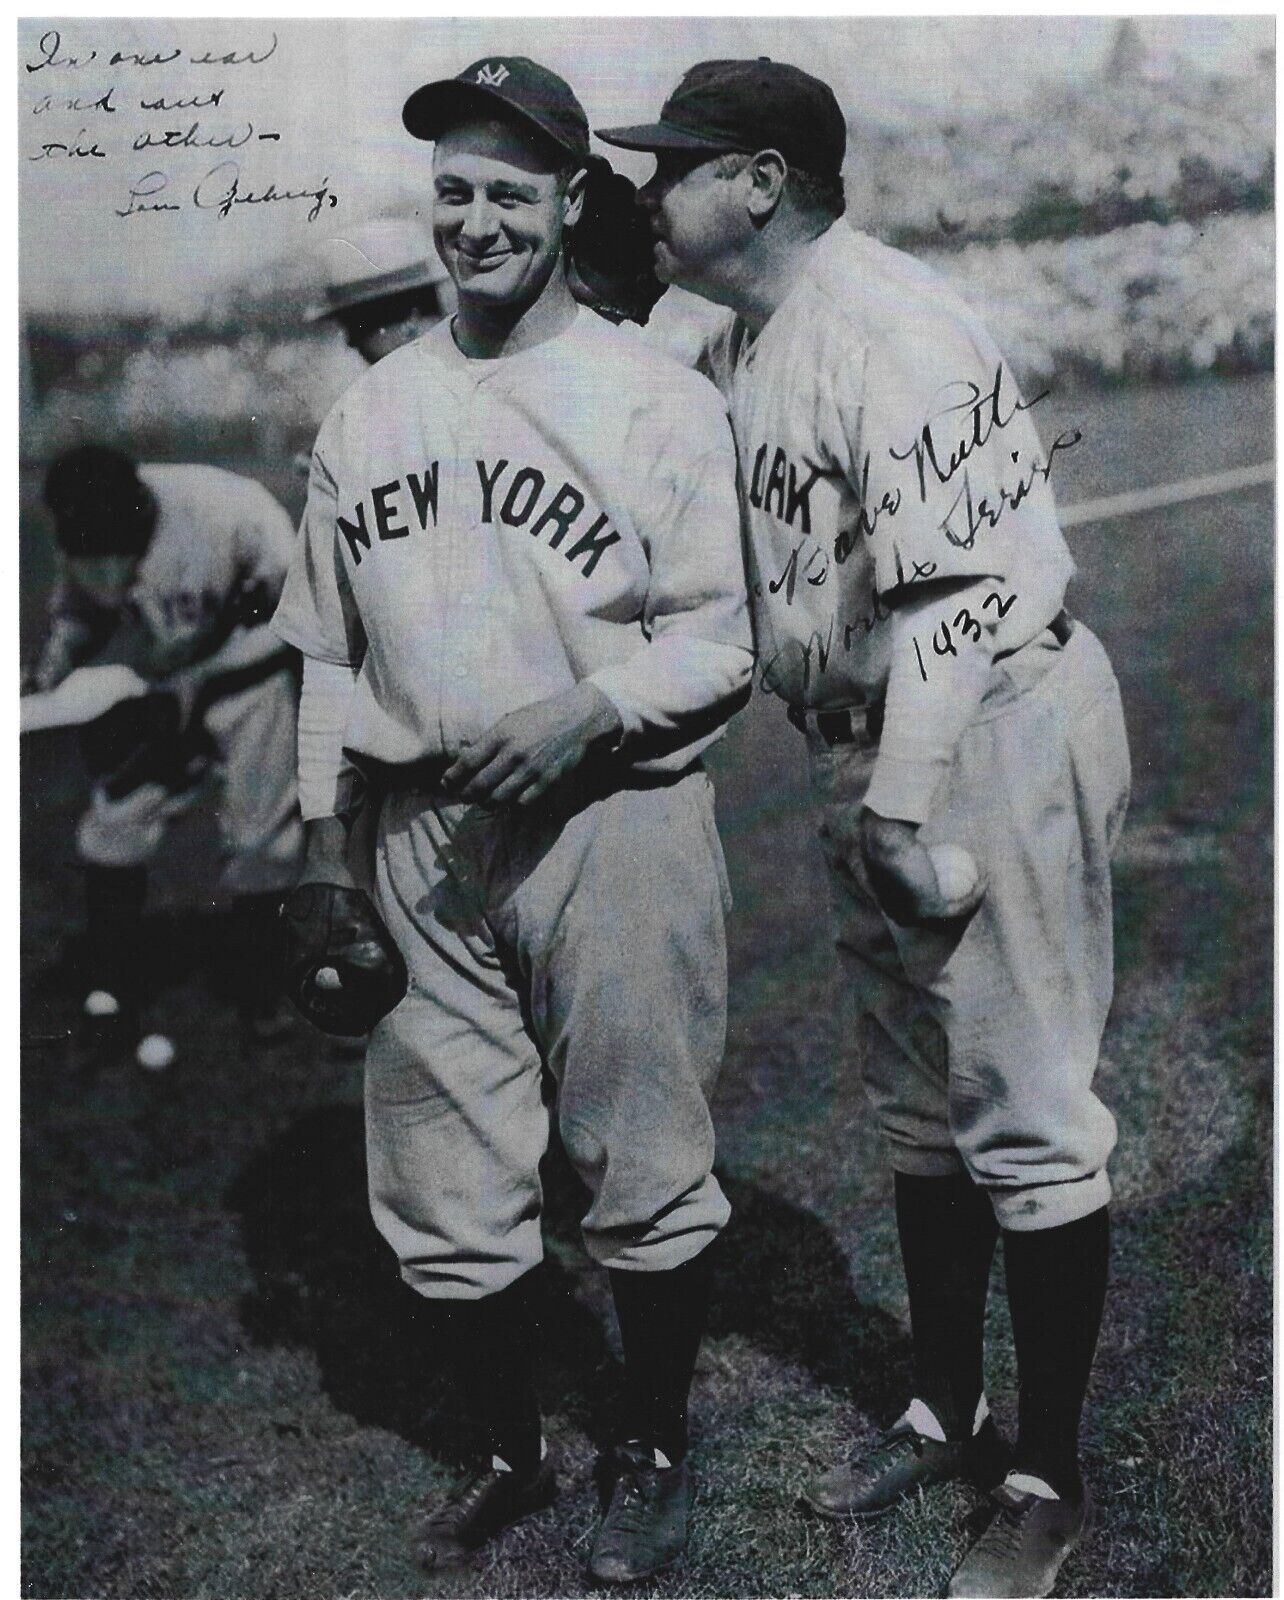 RARE  THE ONLY ONE ON EBAY  BABE RUTH & LOU GEHRIG  8X10 SIGNED REPRINT